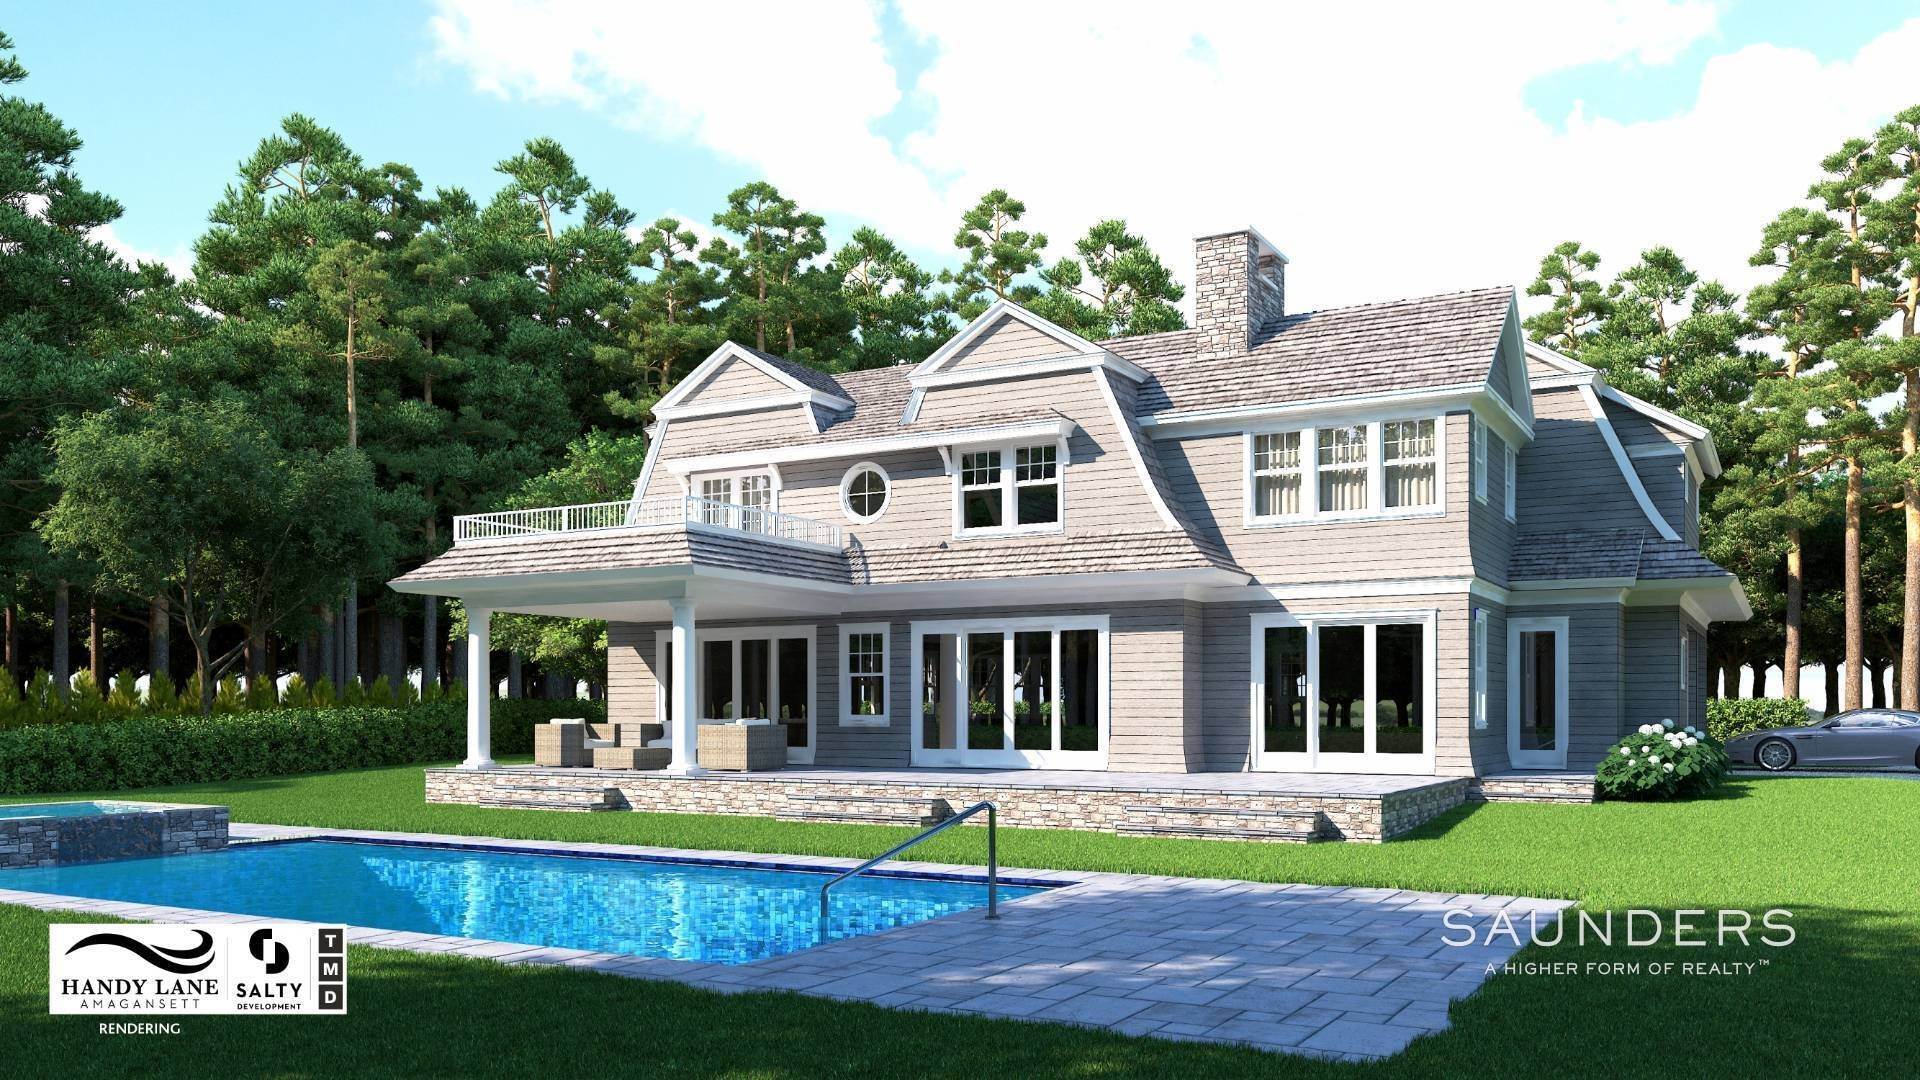 3. Single Family Homes for Sale at Amagansett South Of The Highway-New Construction 35 Handy Lane, Amagansett, NY 11930